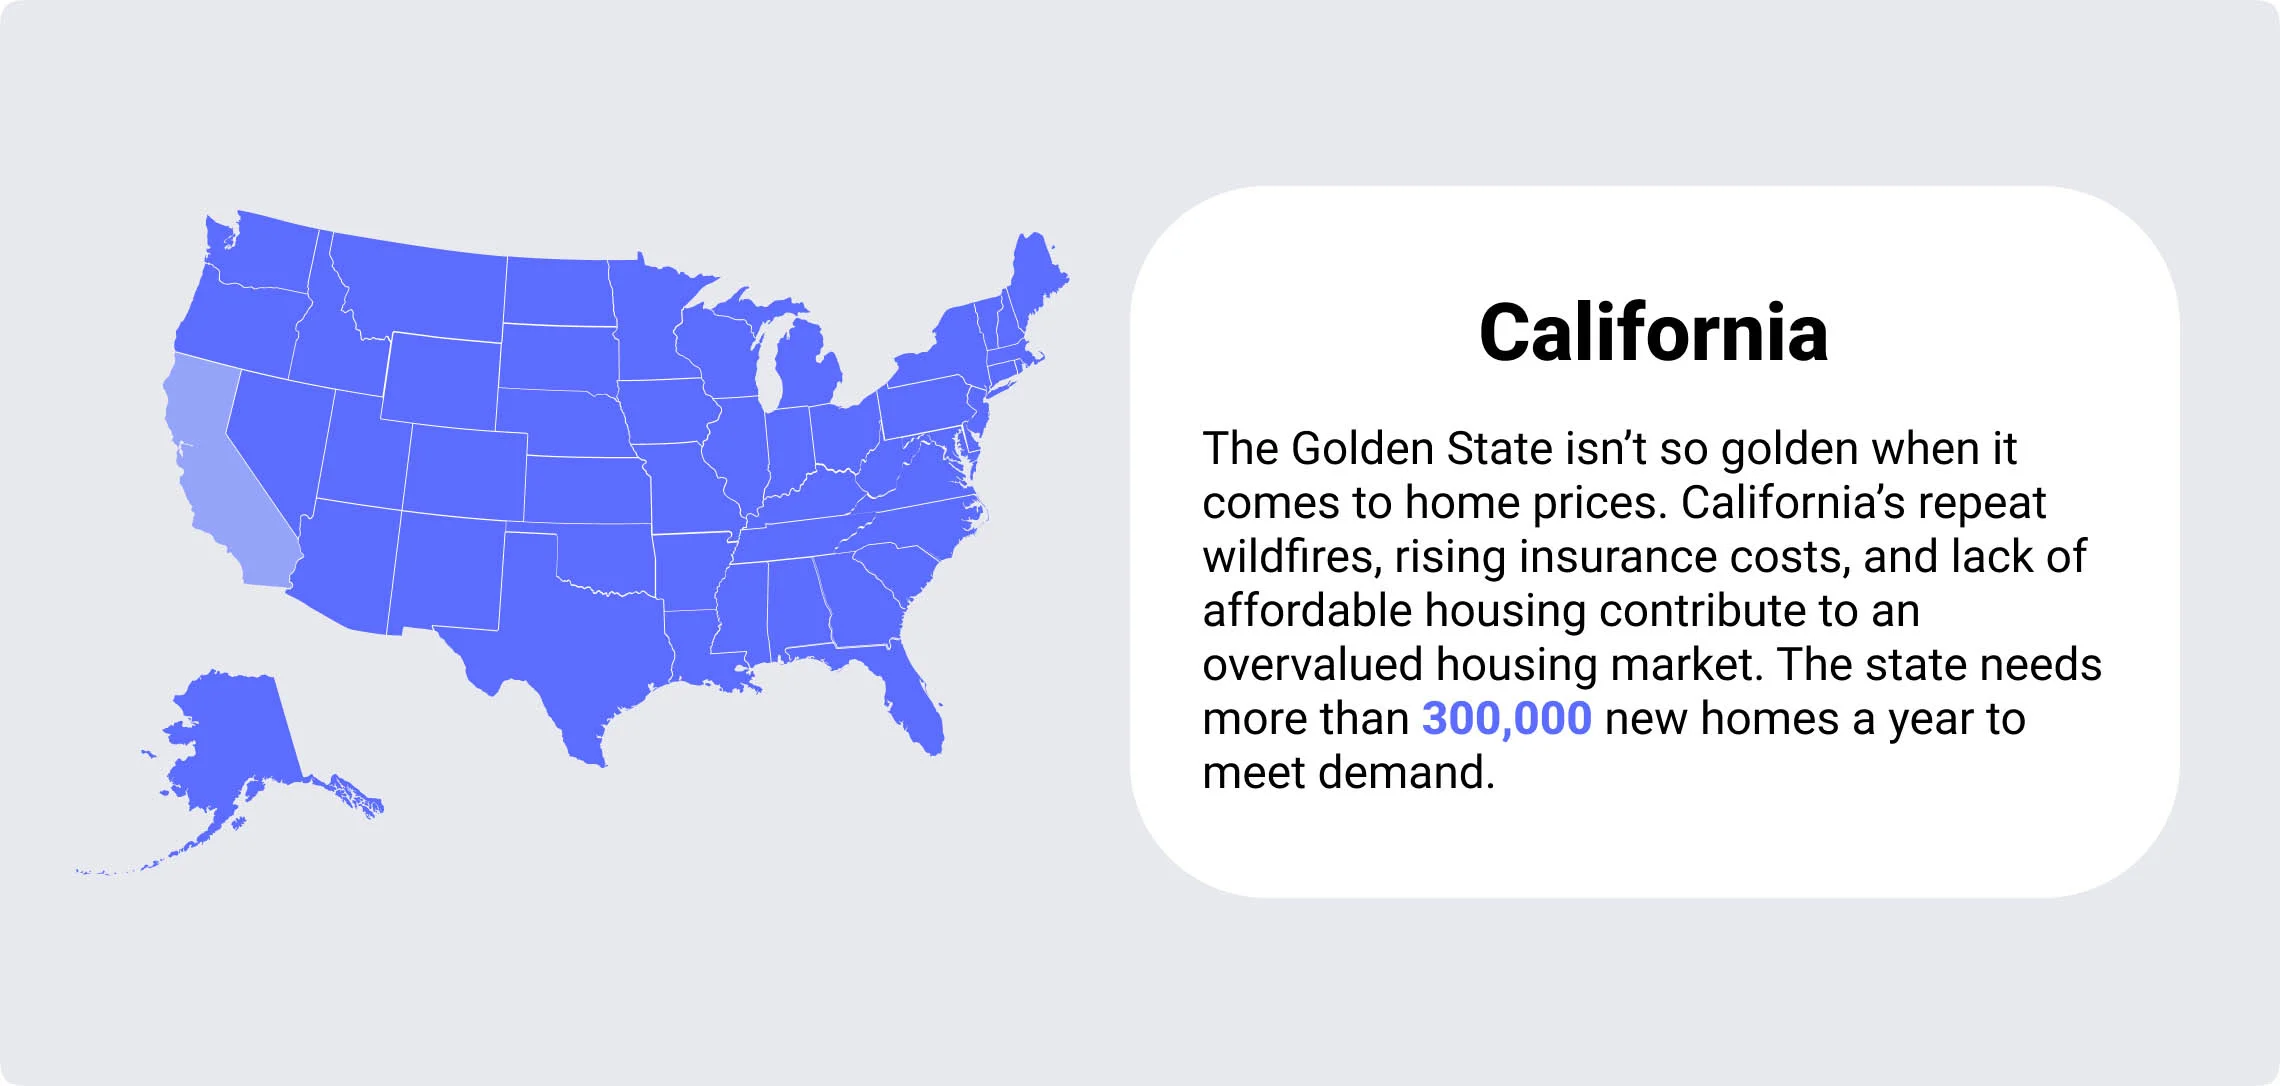 California most overvalued housing market